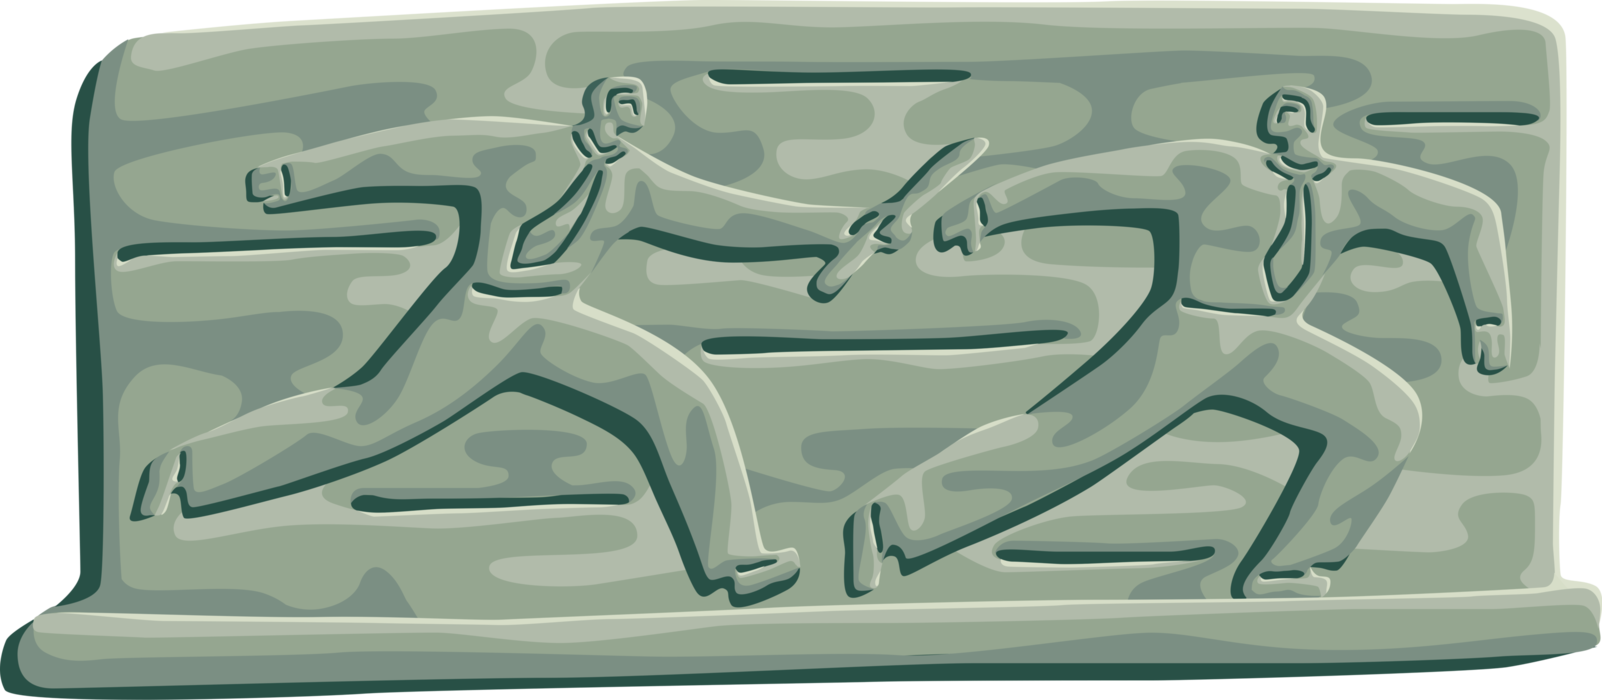 Vector Illustration of Track and Field Athletic Sport Contest Business Associates Benefit from Teamwork in Relay Race to Pass Baton